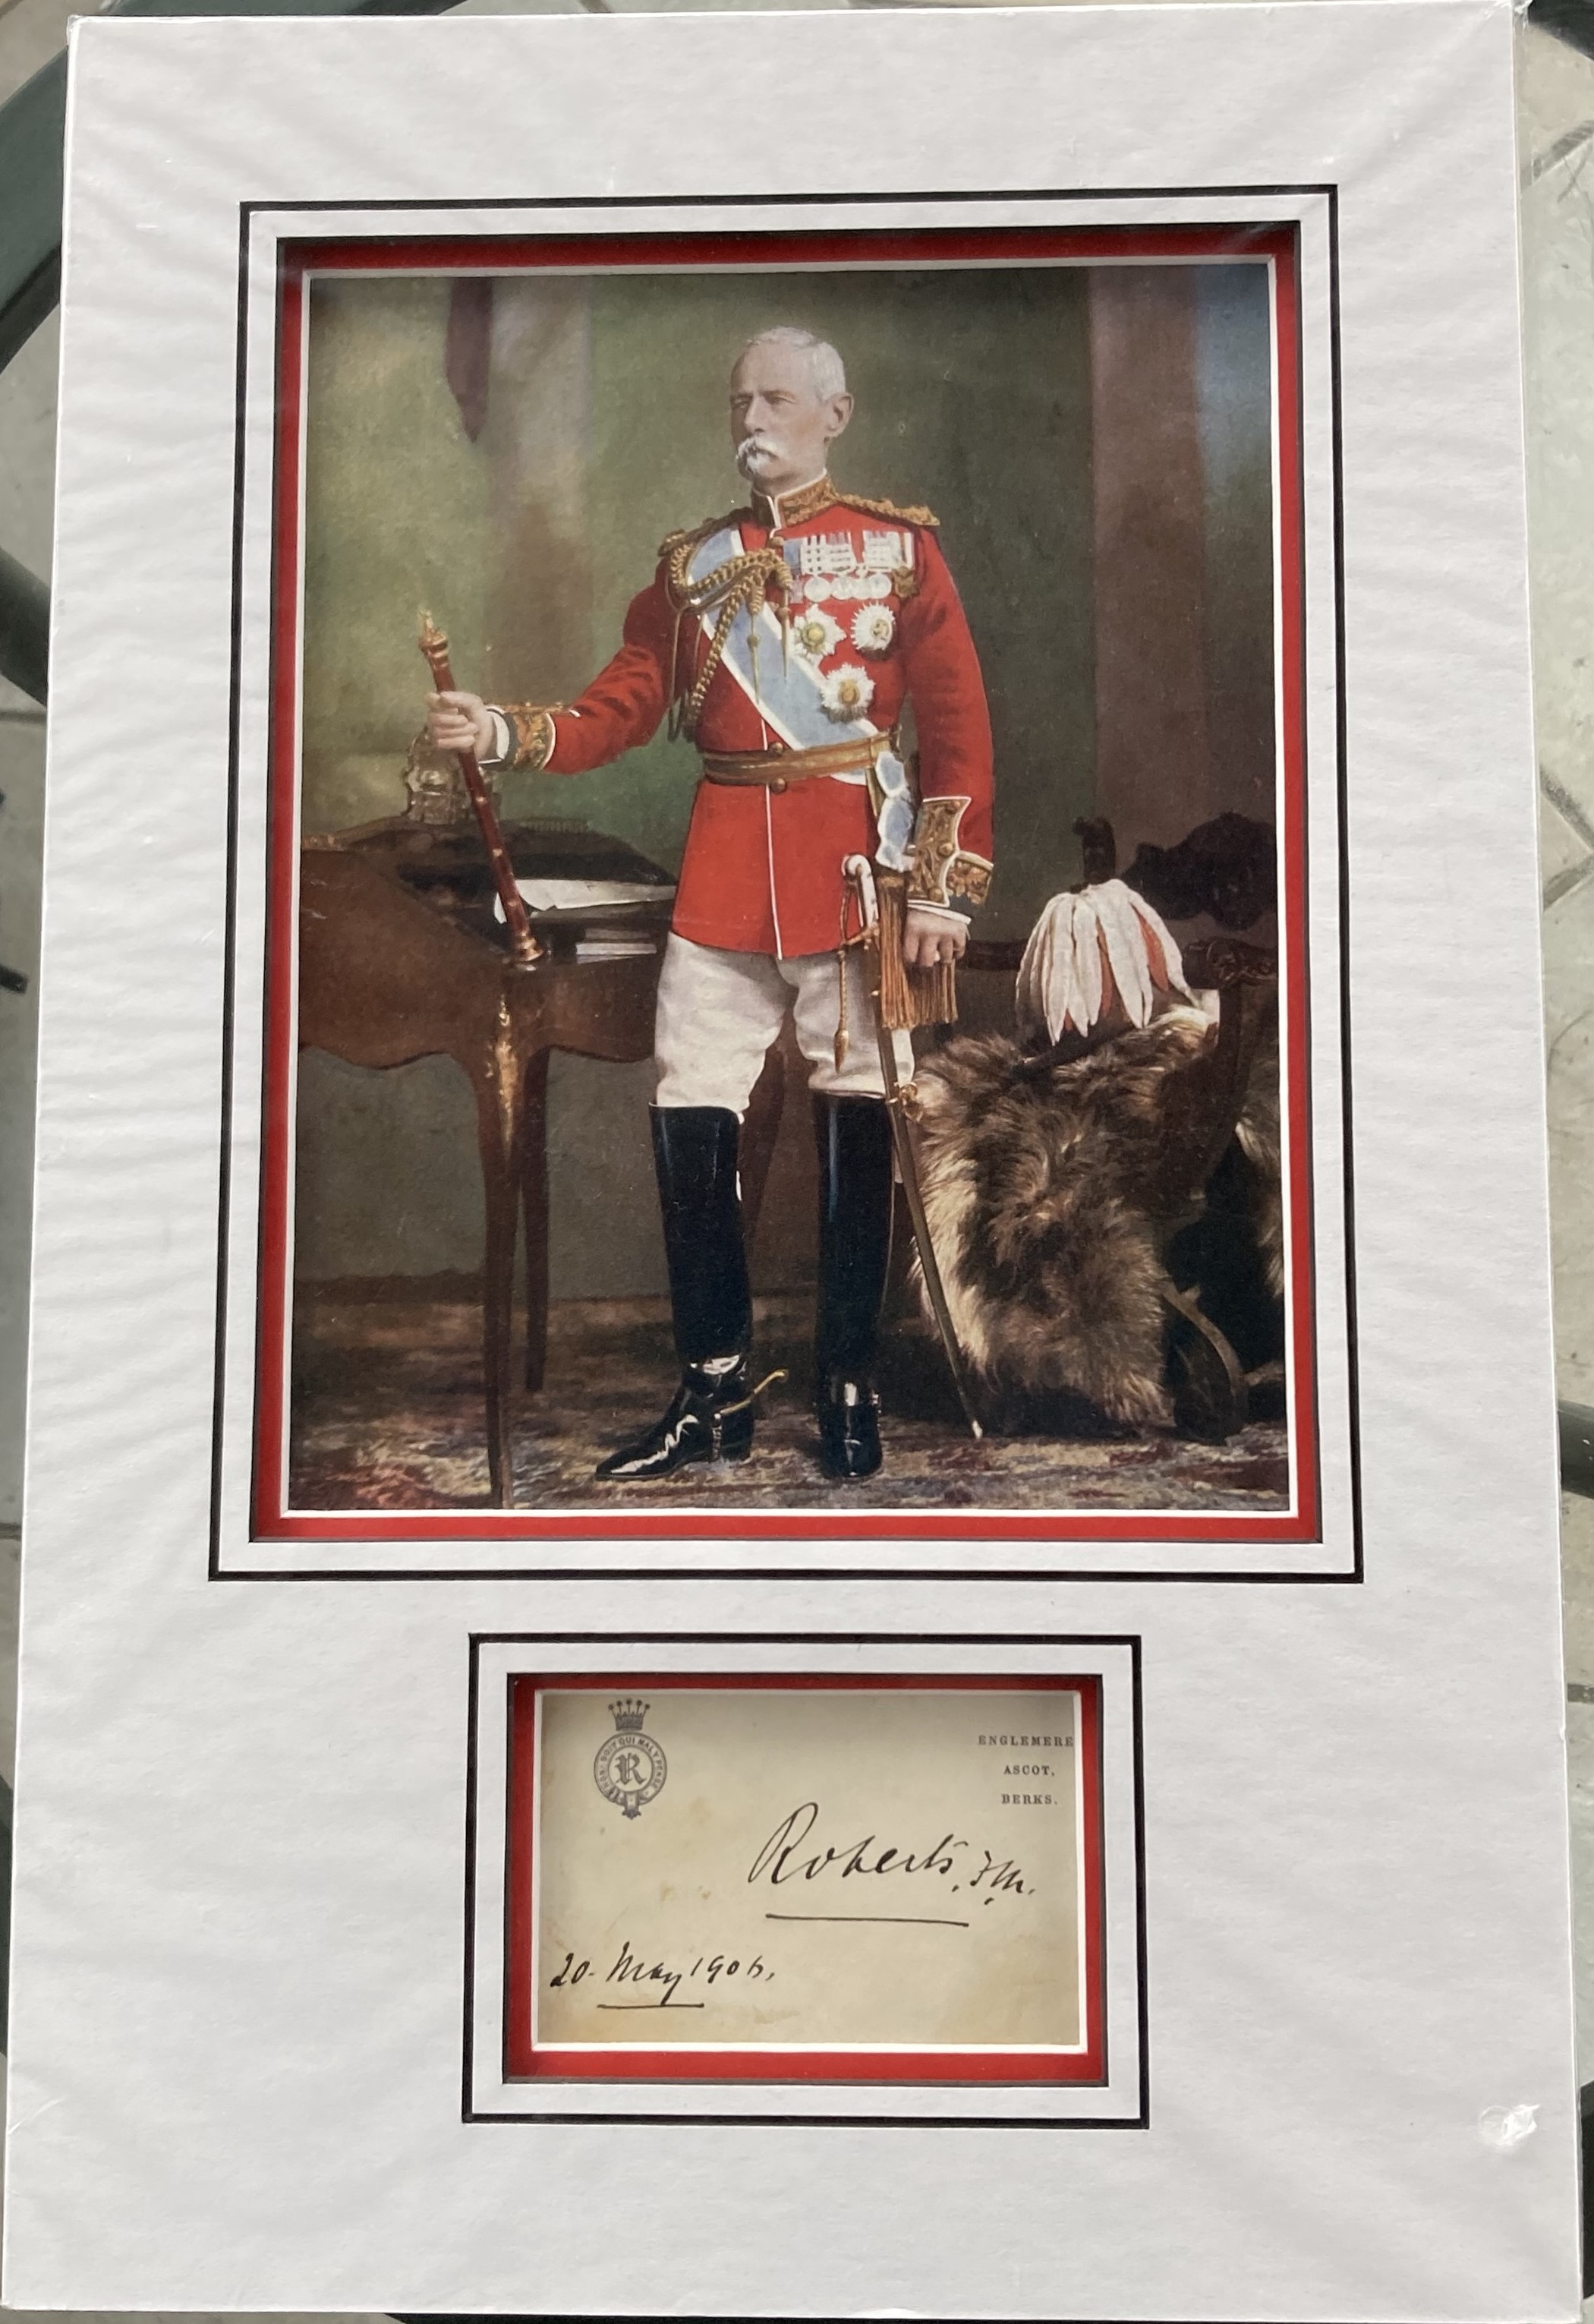 Field Marshal Frederick Roberts VC signed envelope mounted with 10 x 8 inch colour full portrait